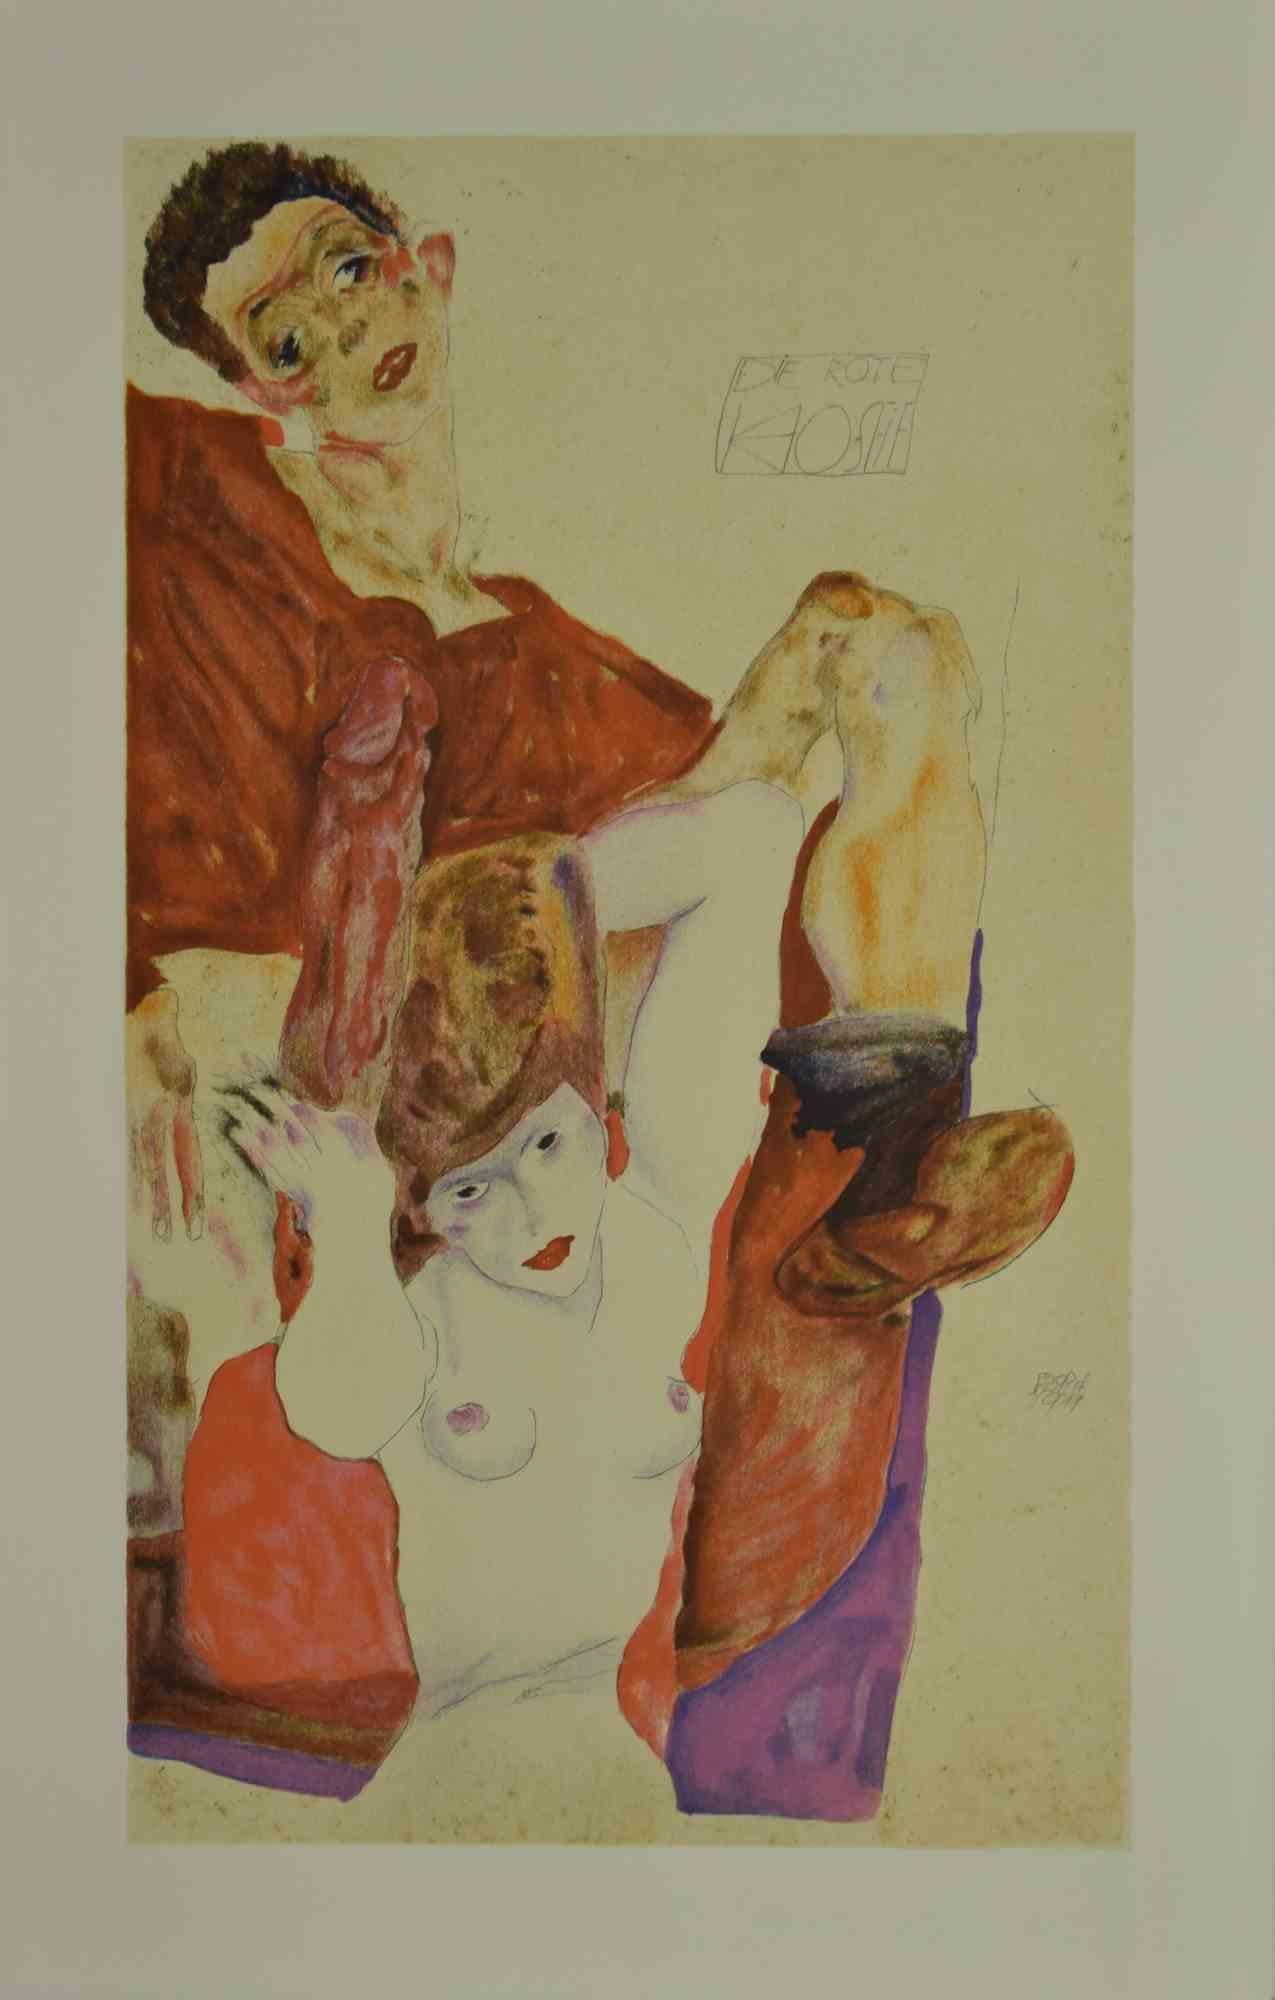 The Red Host is a colored lithograph from the portfolio " Erotica"  by Egon Schiele.

It deals with a reproduction of the homonym artwork realized in watercolor and pencil by the Austrian artist in 1911.  Edition of 1200 copies , printed by